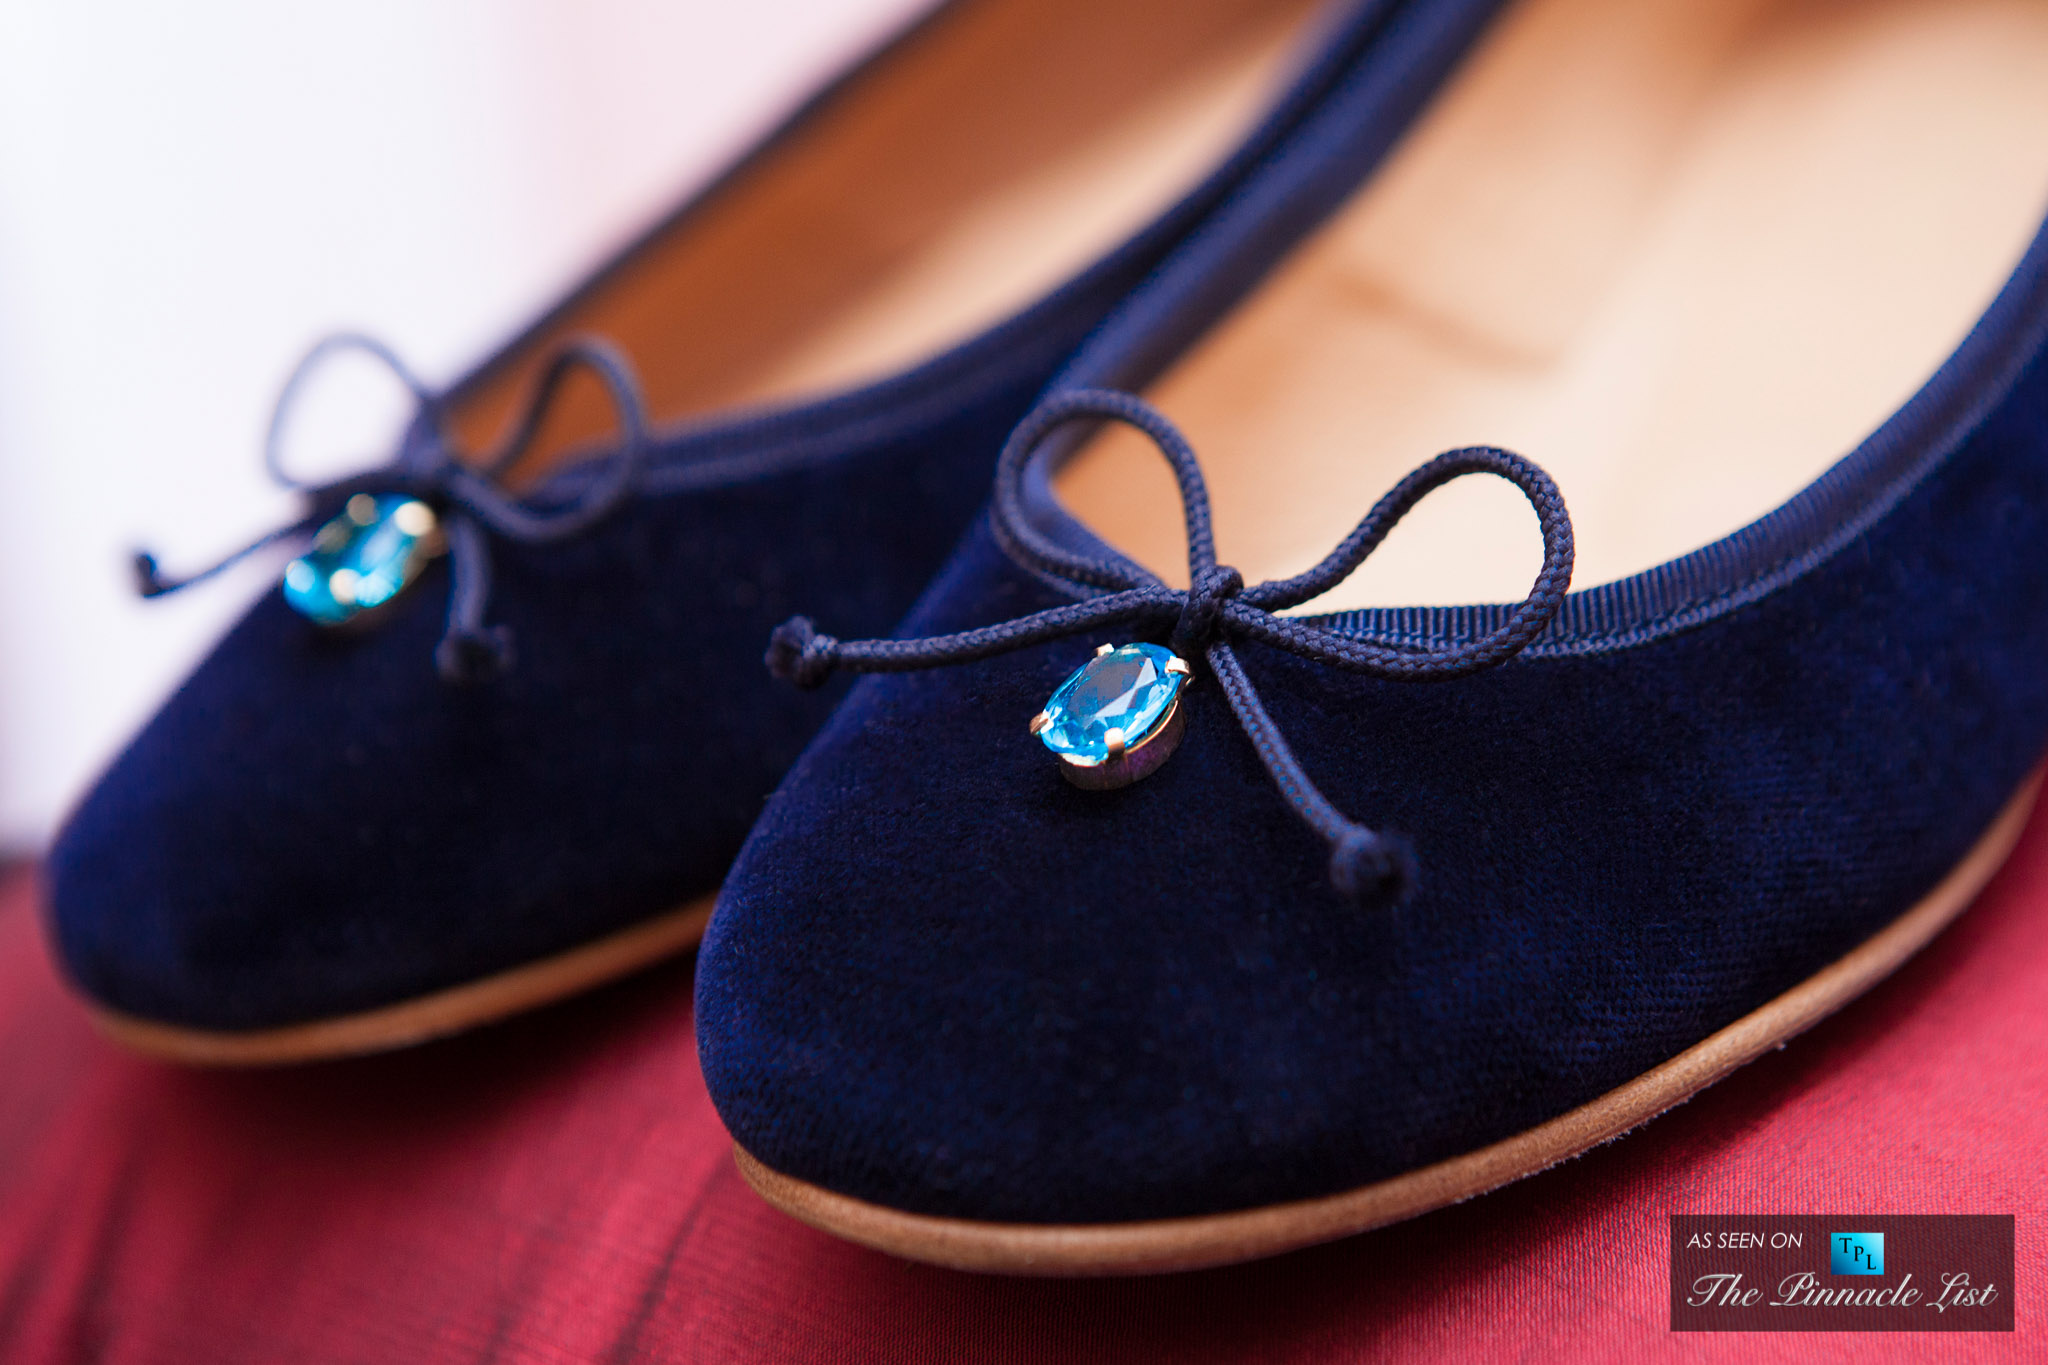 Luxury at Your Feet - Josefinas Blue Persian Salt are the Most Expensive Ballet Flats in the World